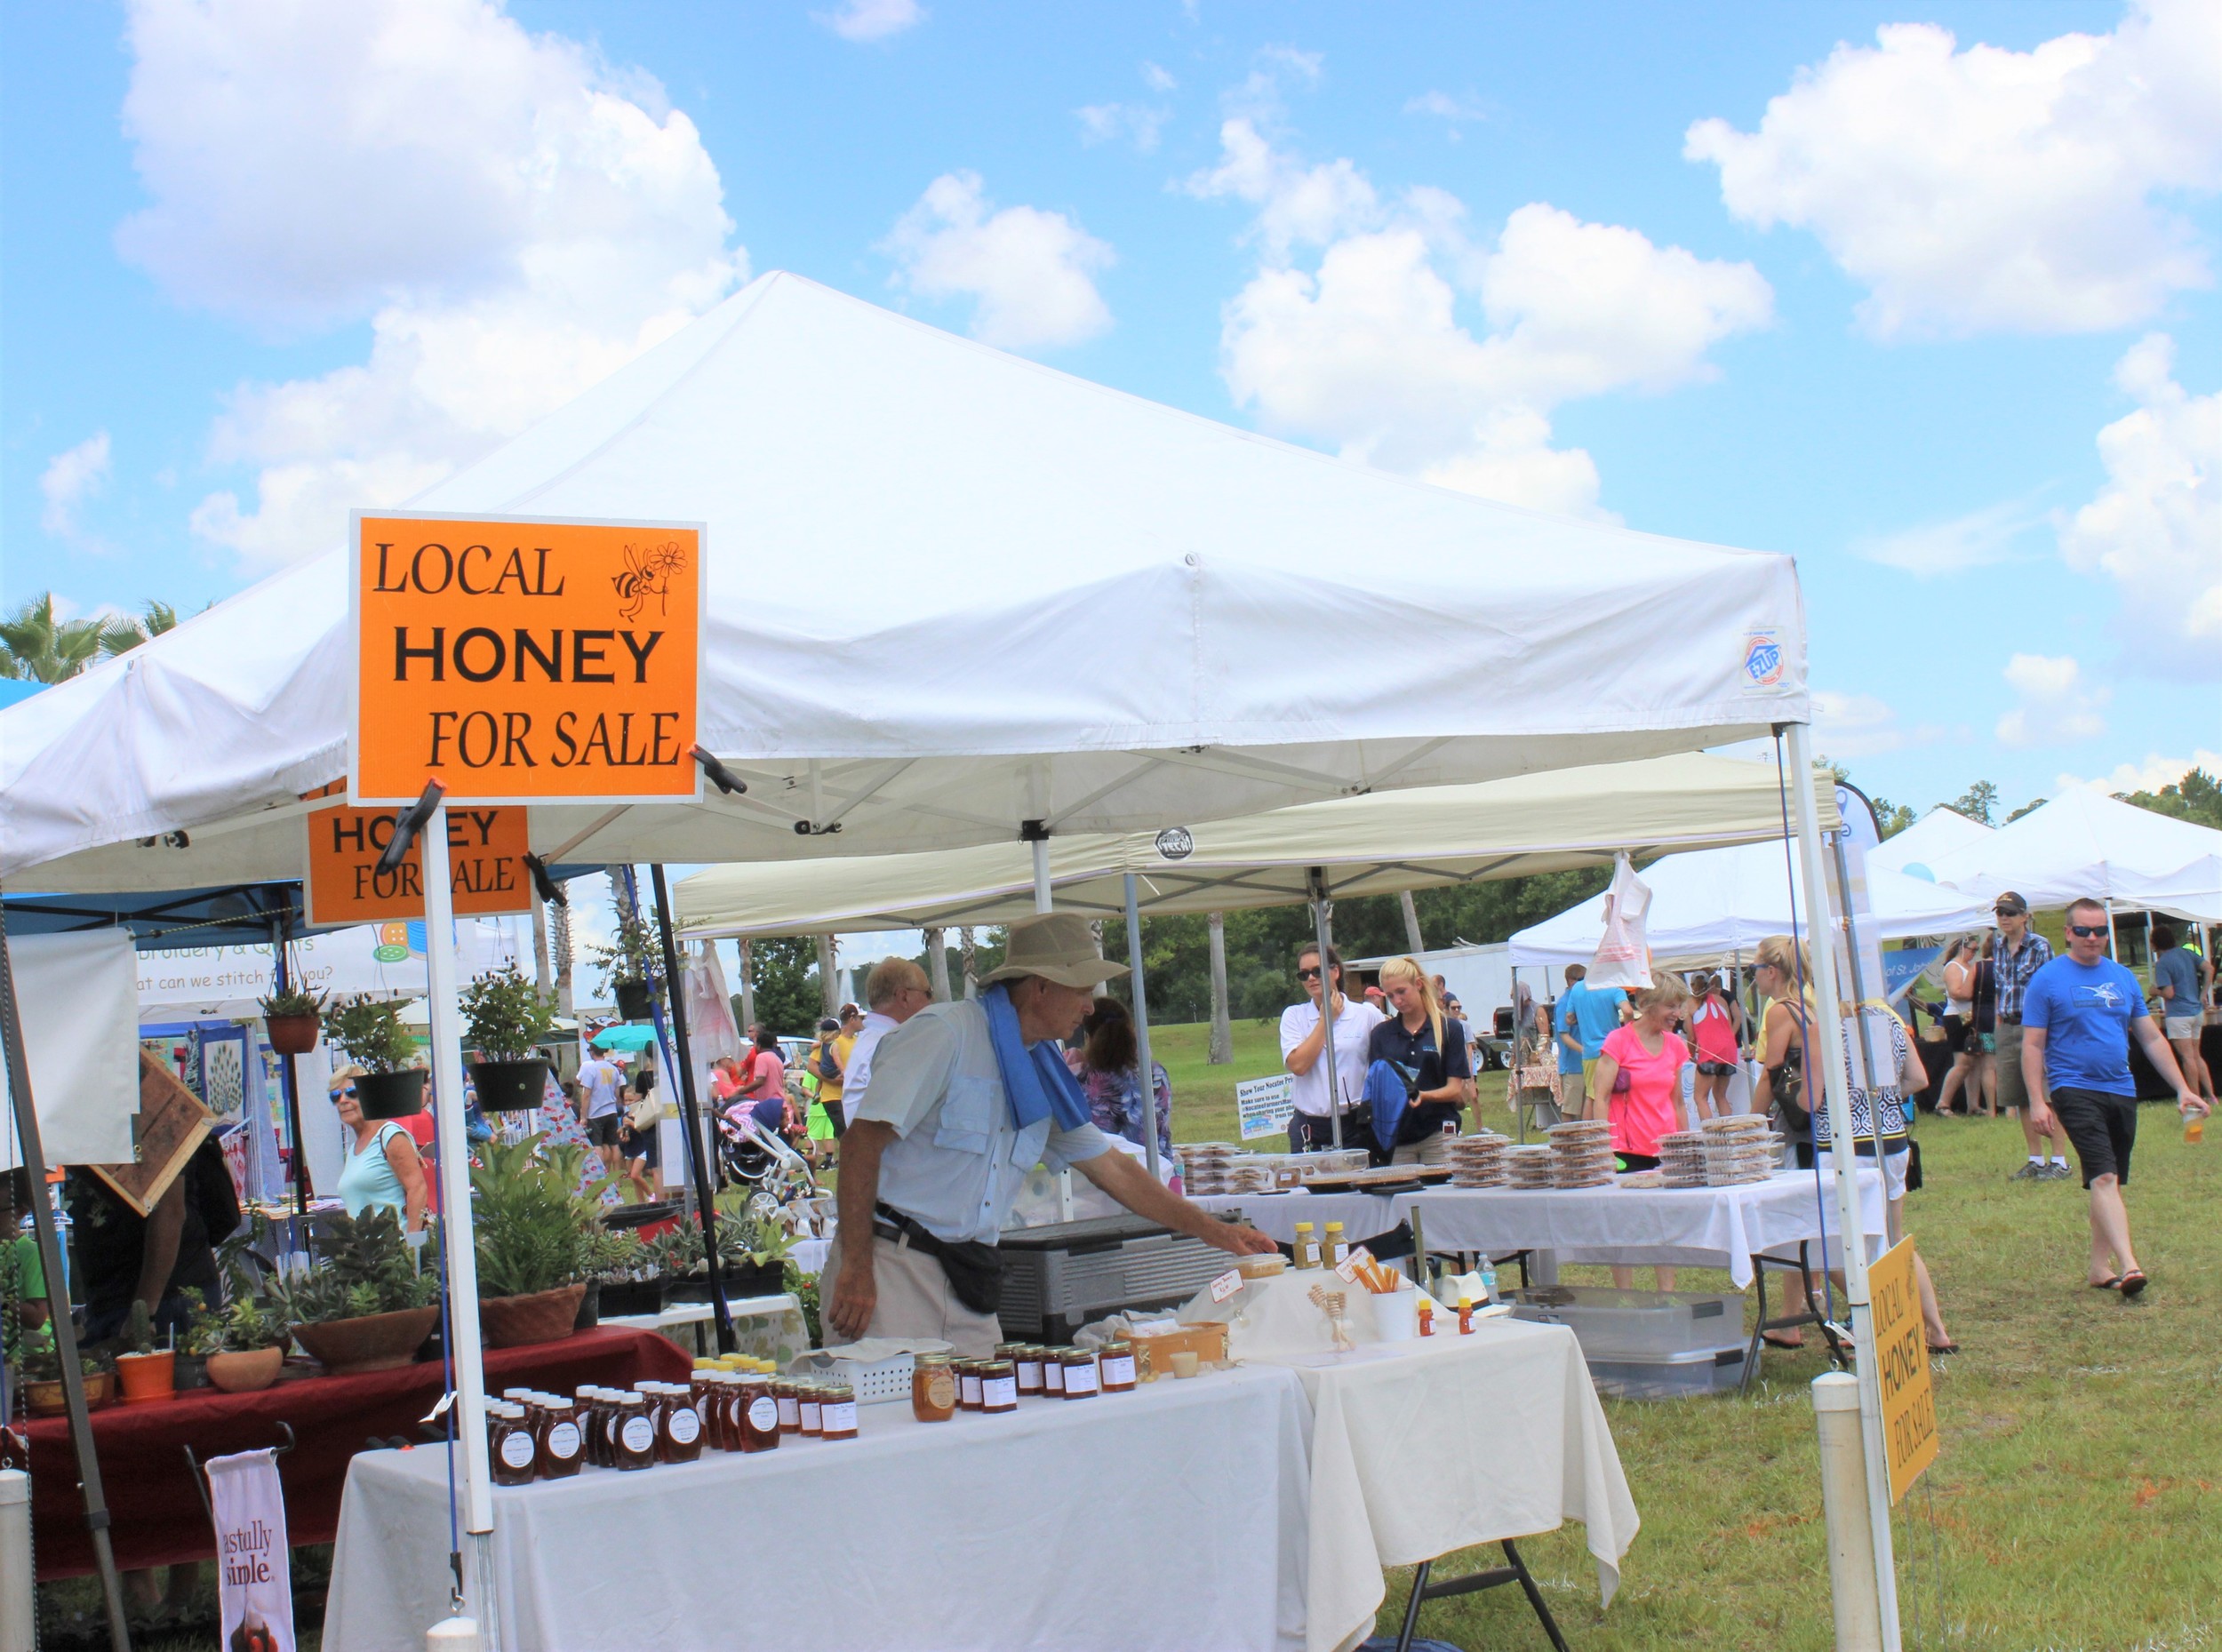 Nocatee’s monthly Farmers Market was held July 15 at Nocatee Town Center, where shoppers were treated to a “Wild Encounters” experience, courtesy of Gatorland, in addition to crafts, produce and more from local vendors.